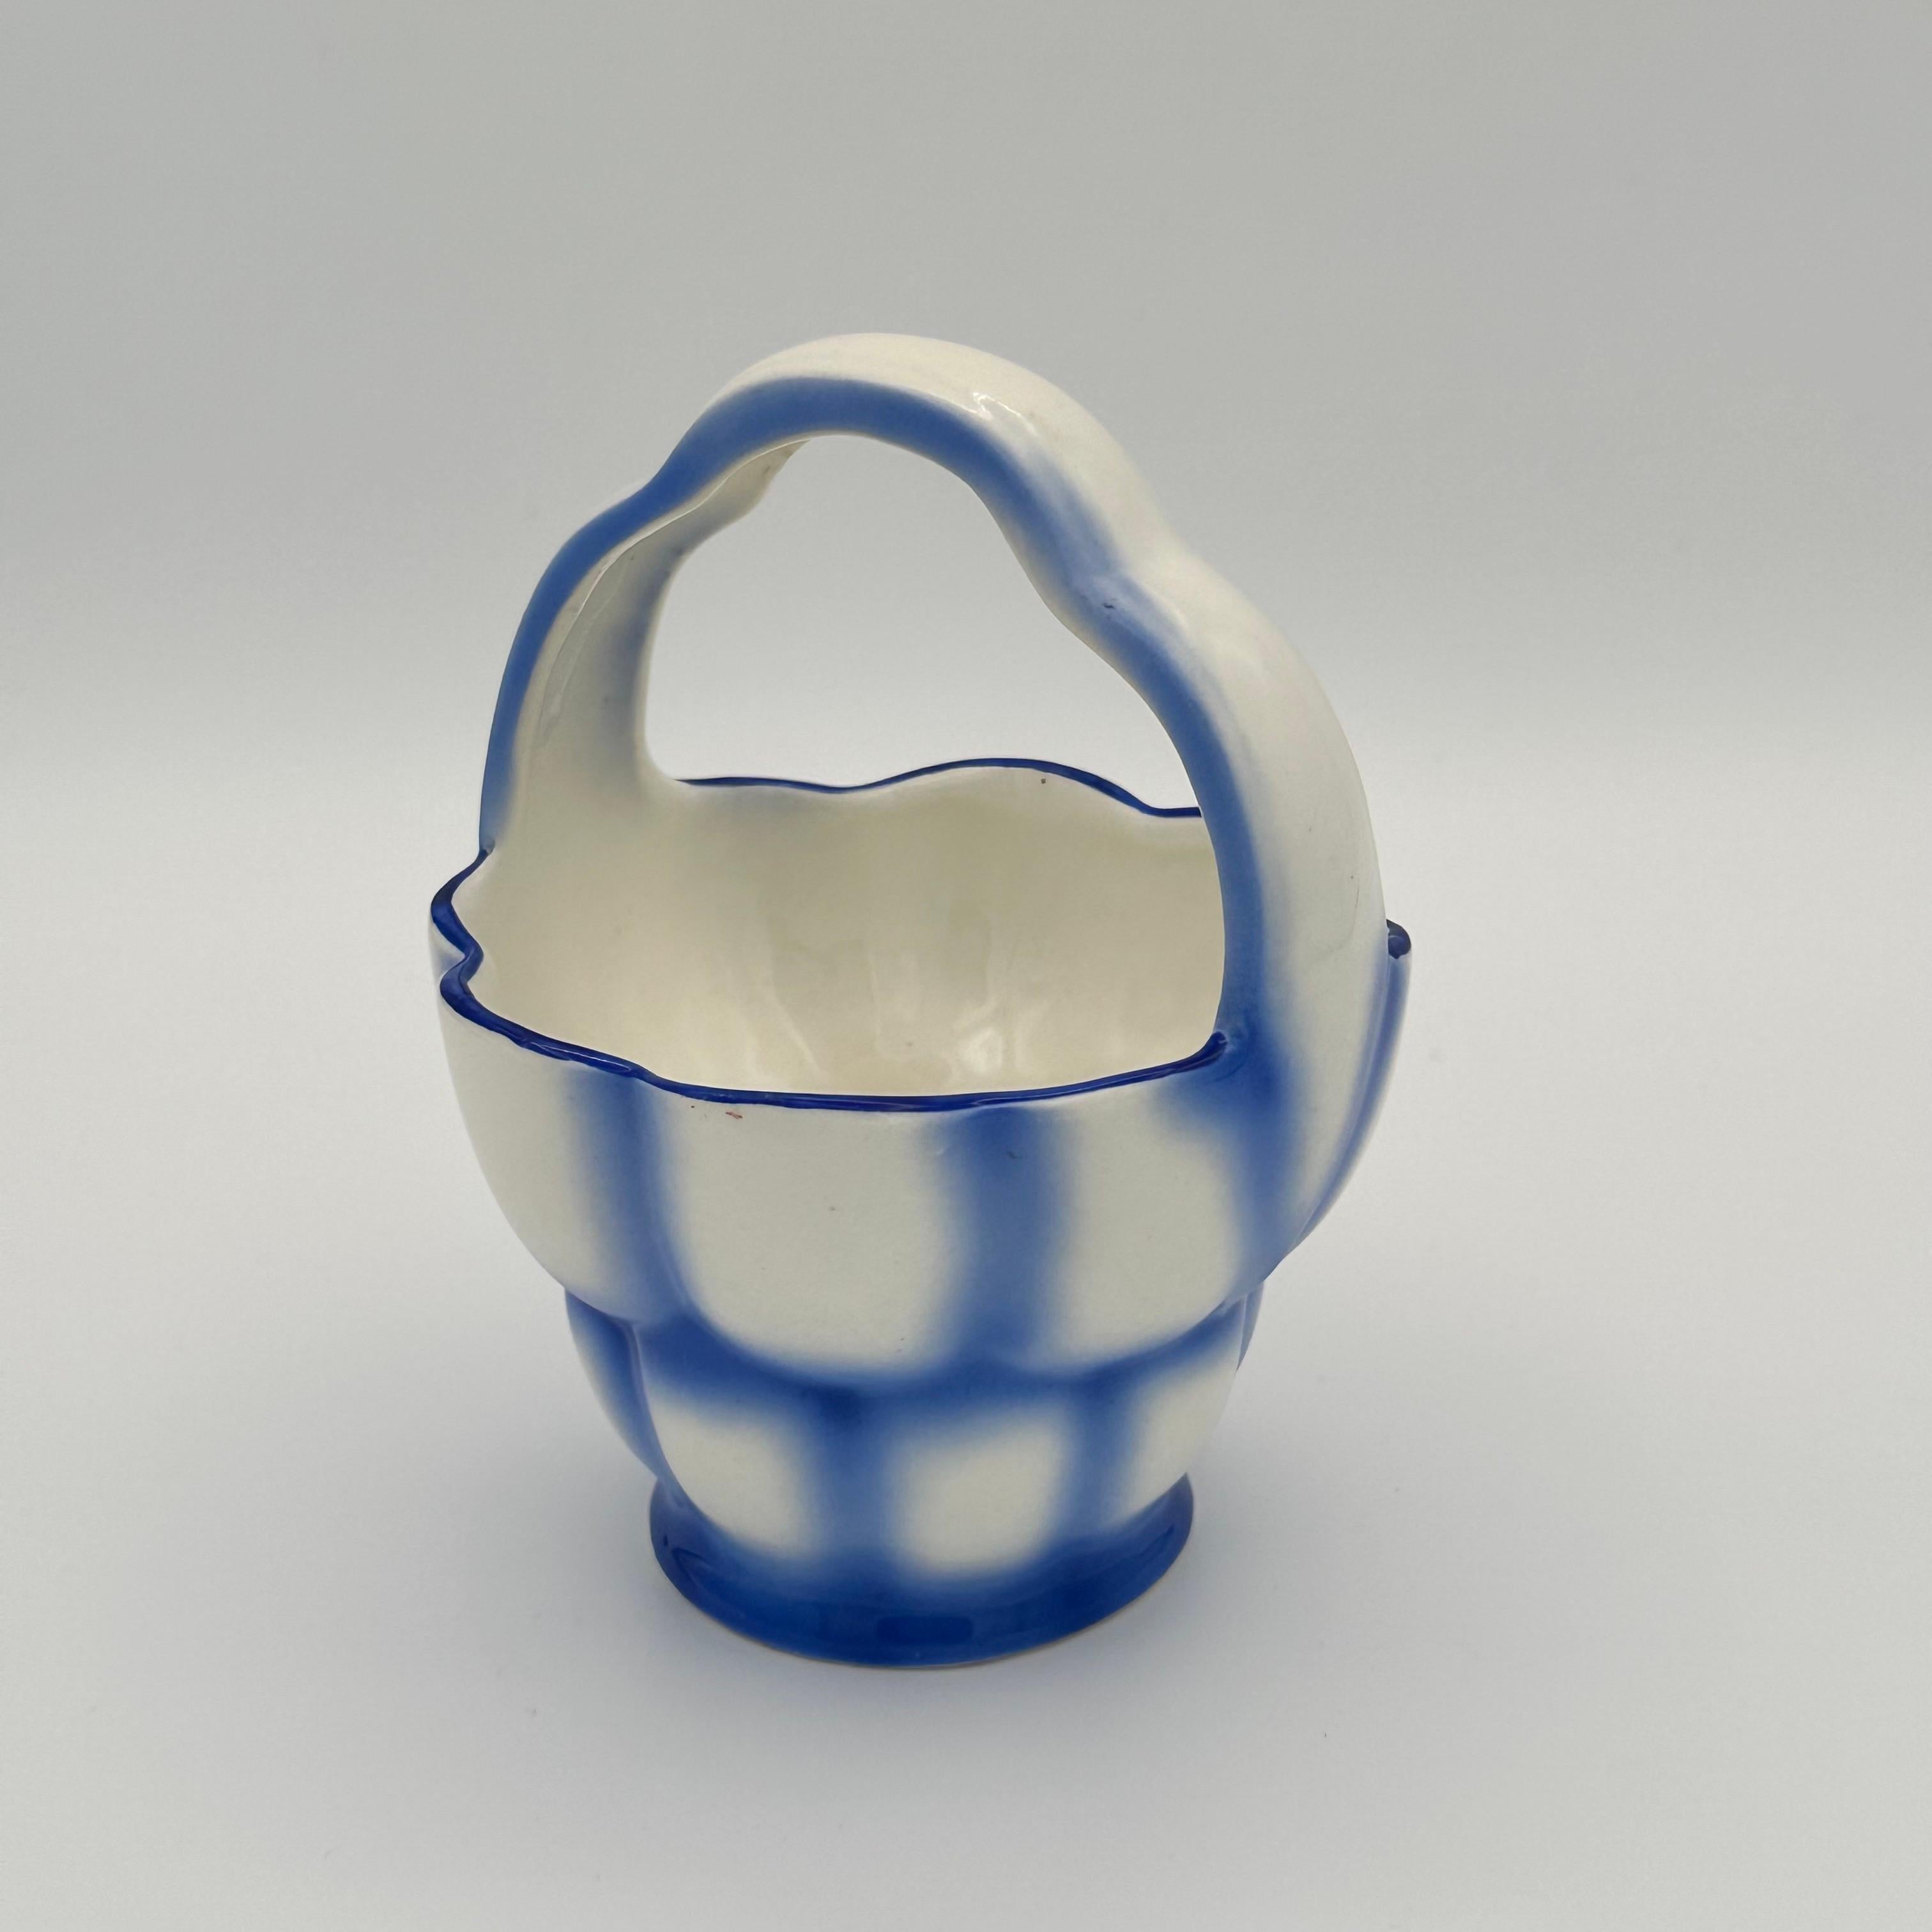 Vintage Blue and White Art Deco Spritzdekor Ceramic Basket from Czechoslovakia  In Good Condition For Sale In Amityville, NY